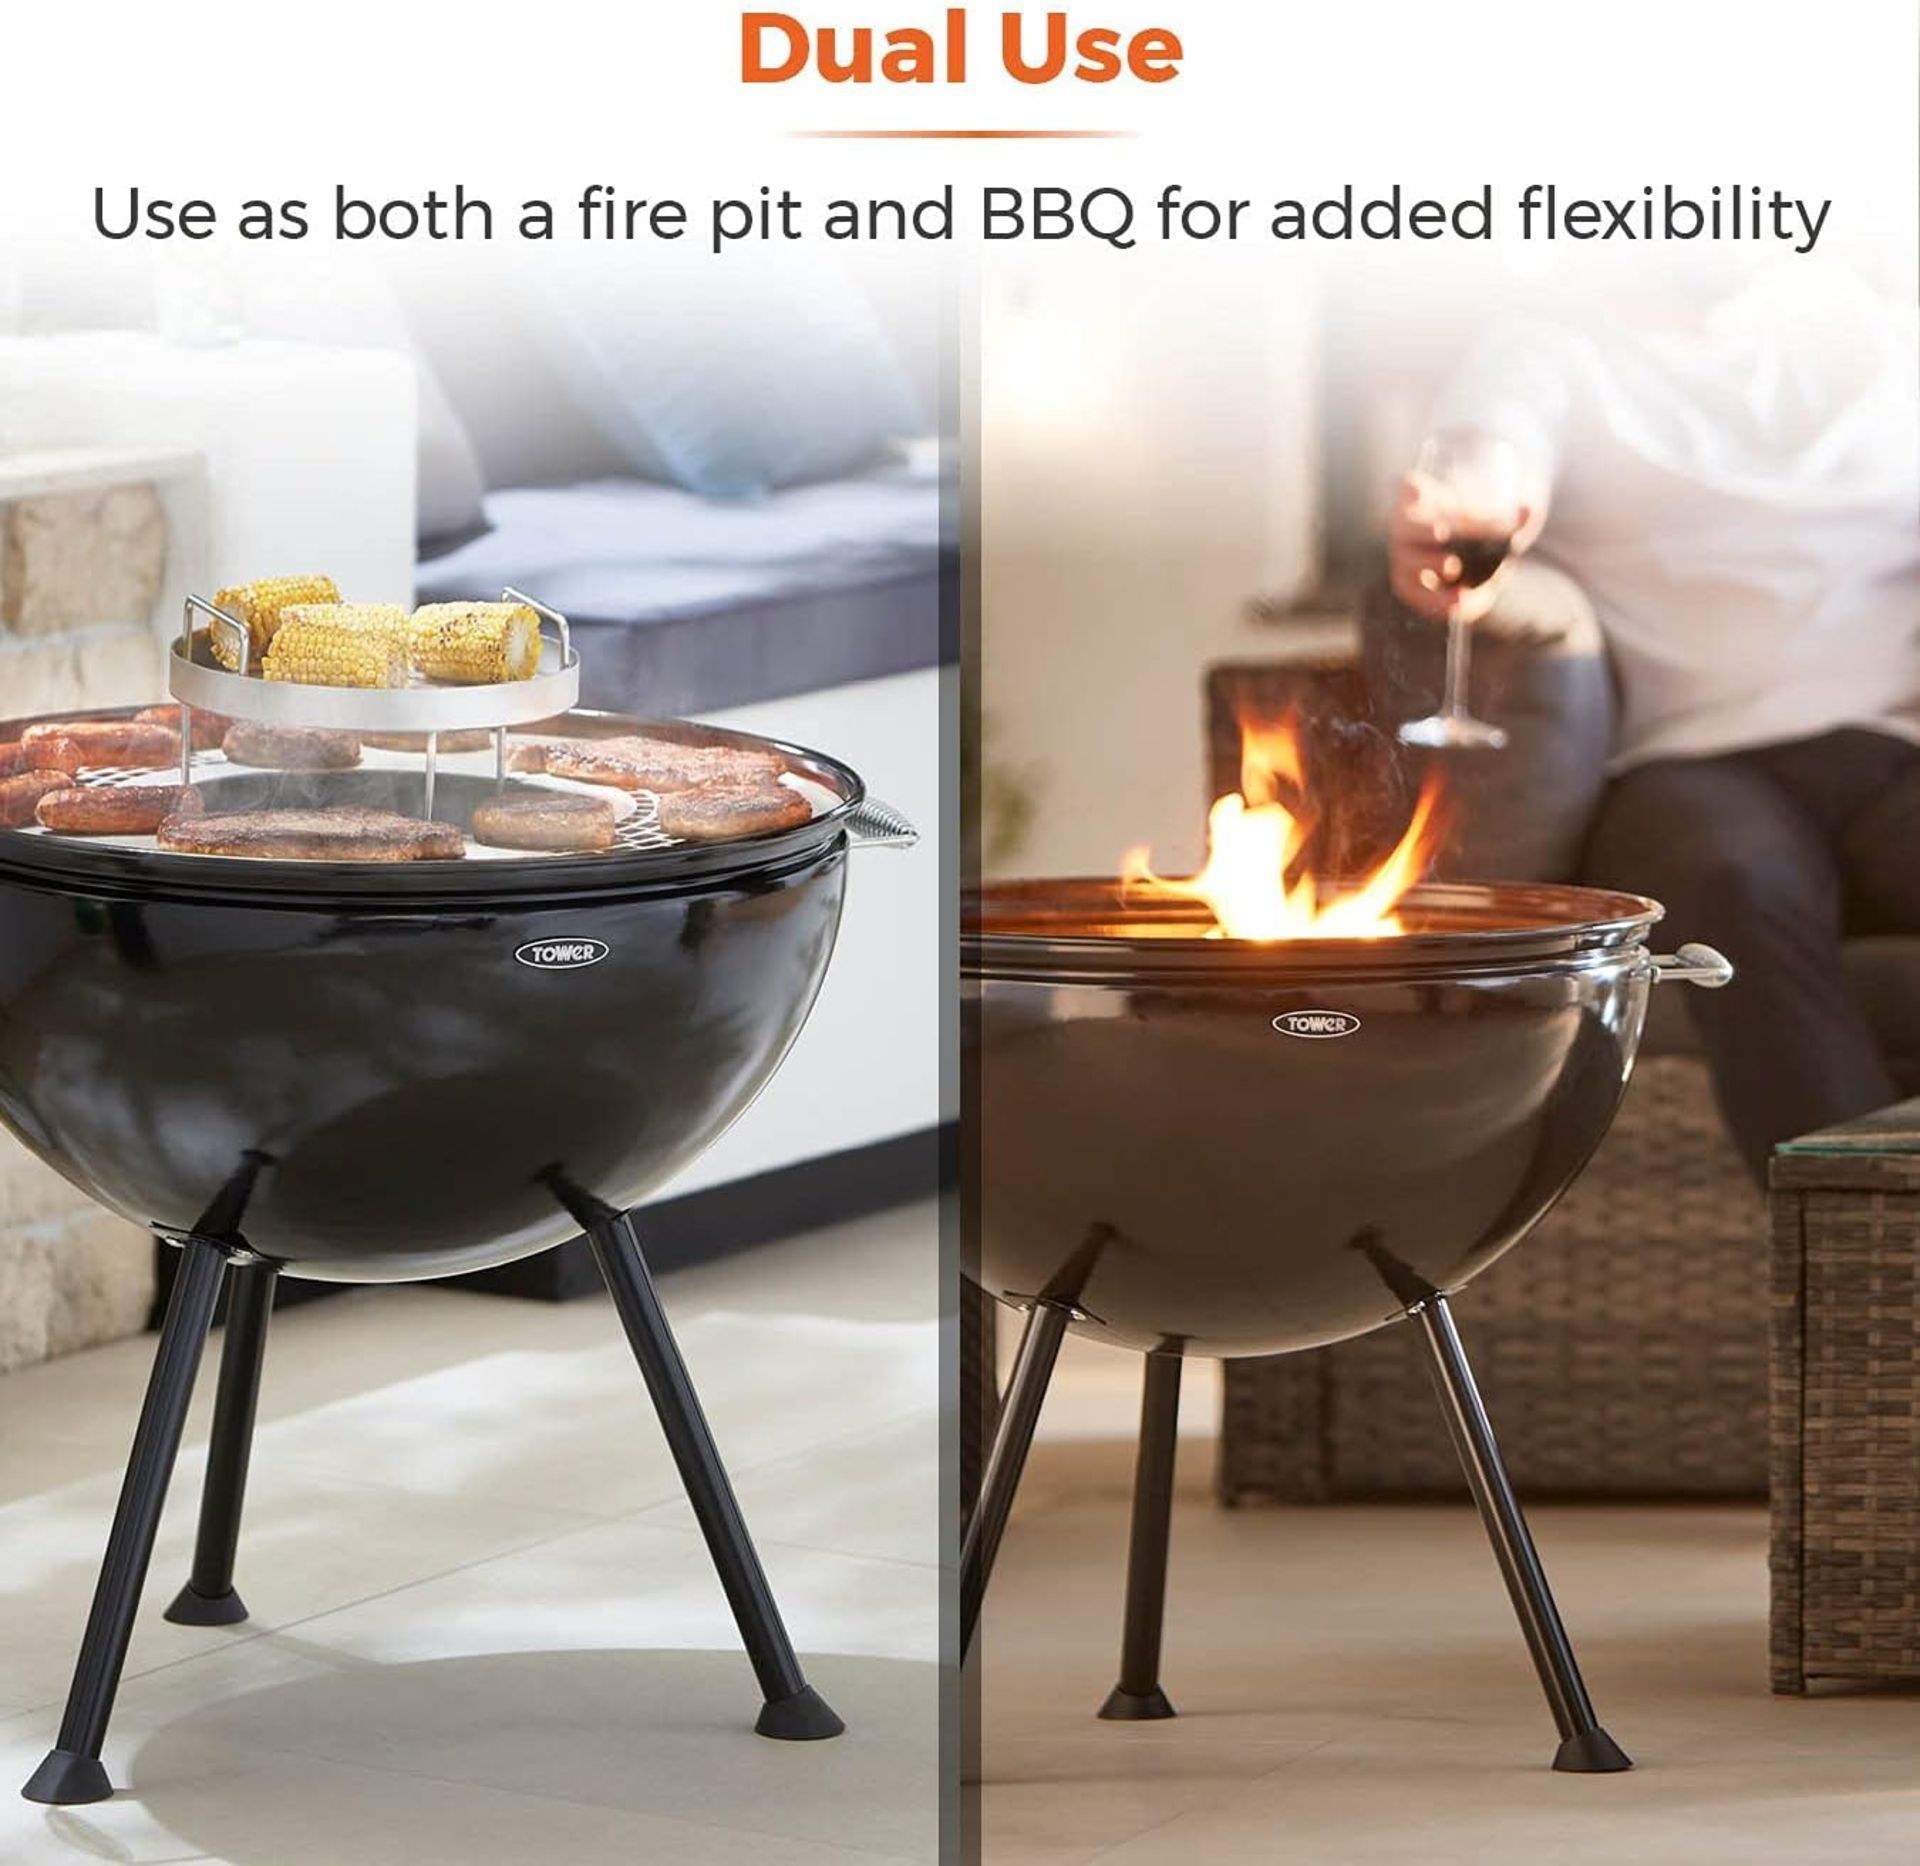 New & Boxed Tower Sphere Fire Pit and BBQ Grill, Black. (VQ577). DUAL USE â€“ This multi- - Image 4 of 6